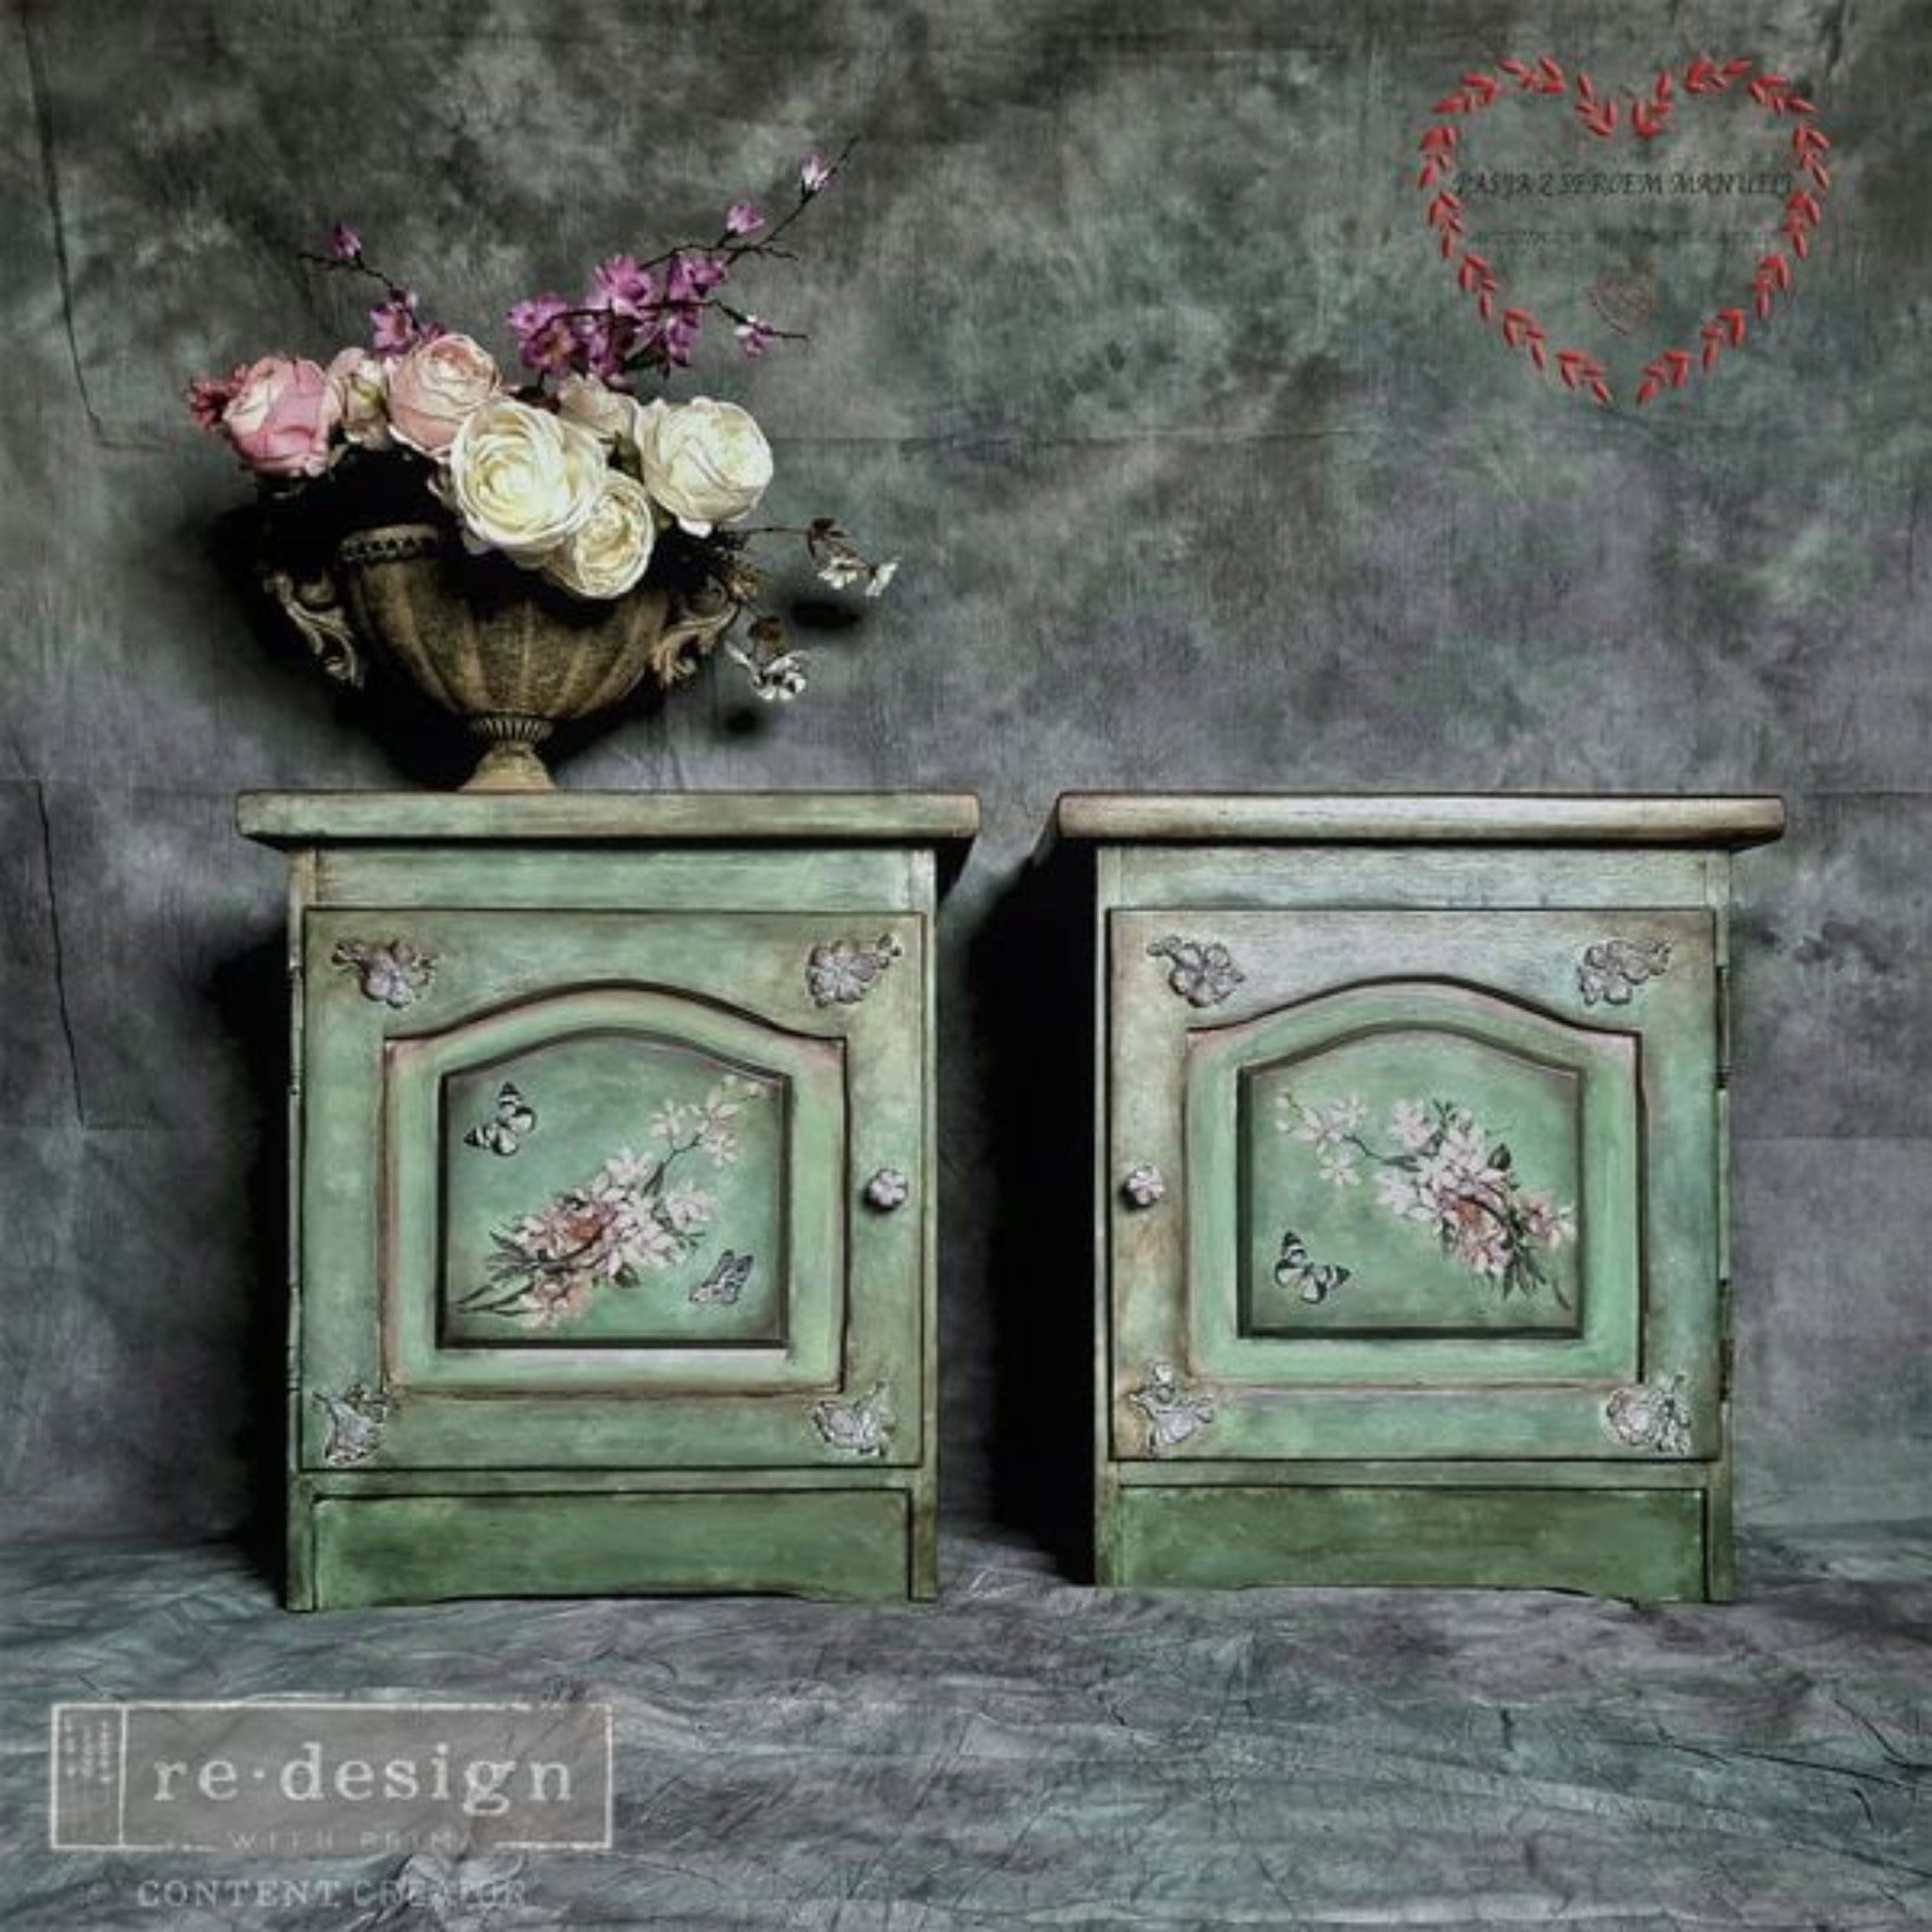 Two vintage nightstands refurbished by Pasja Z Sercem Manueli are painted a blend of light and dark greens and feature ReDesign with Prima's Blossom Botanica on its door inlays.